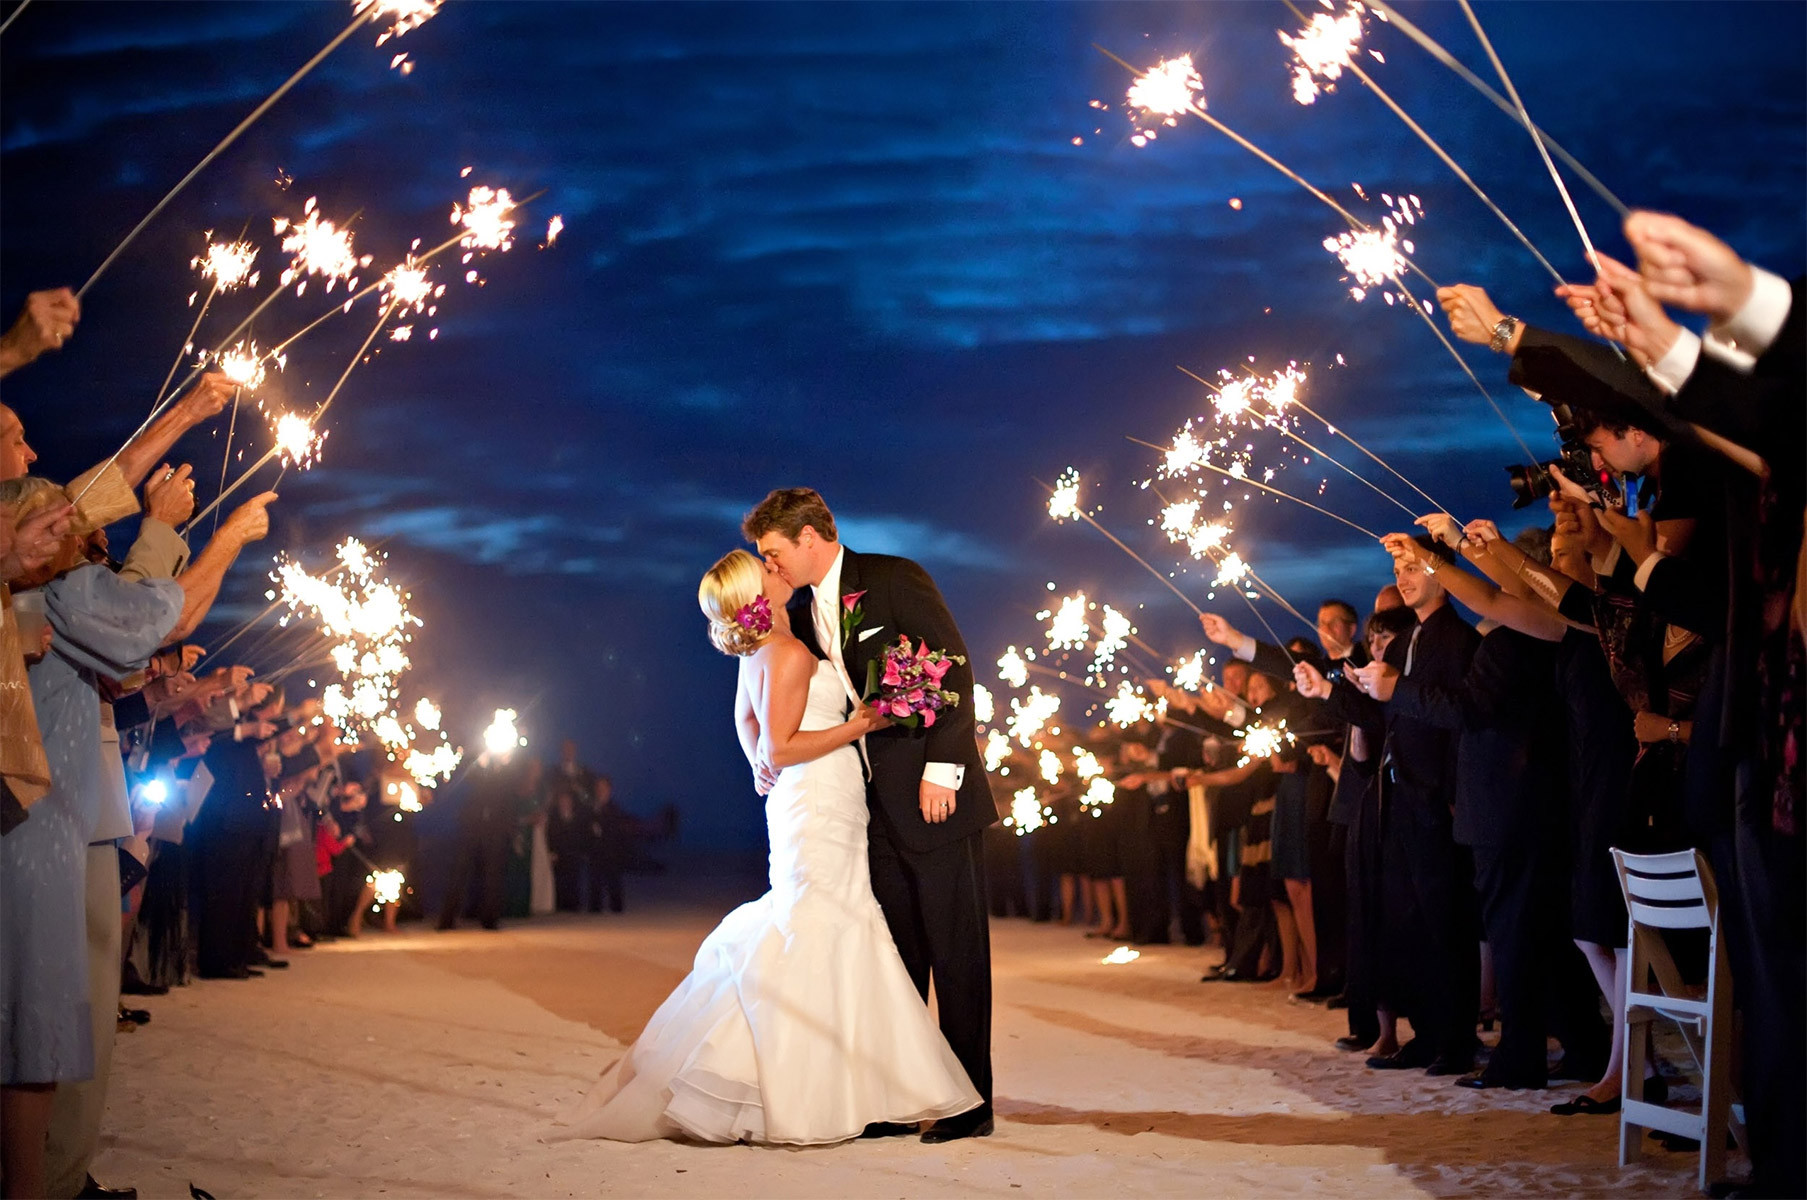 Wedding Sparkler Photos
 A Guide to Using Sparklers for Your Wedding Exit Send f